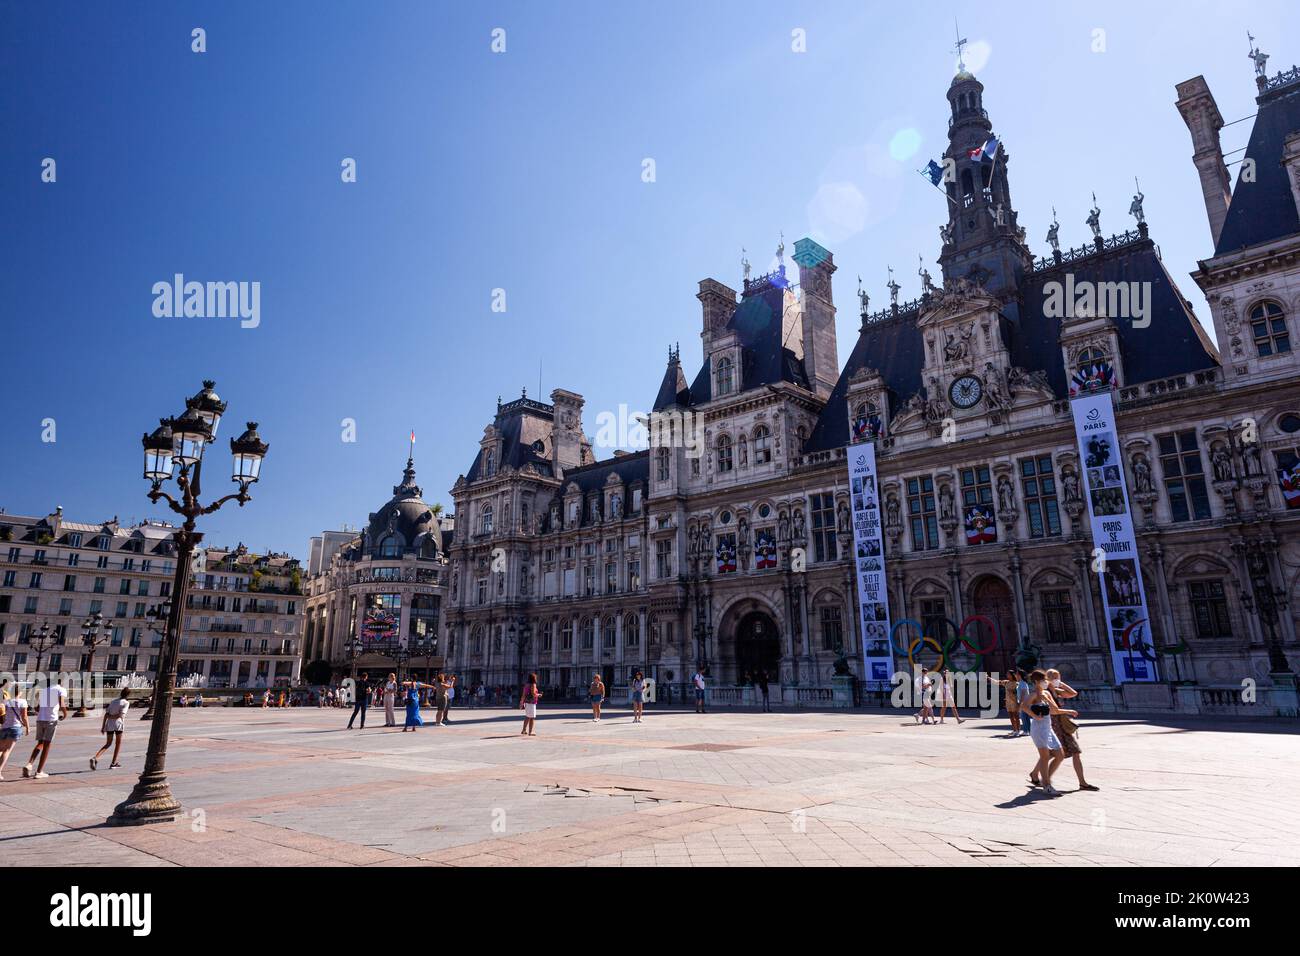 Paris, France - July, 15: View of the city hall of Paris called Hotel de ville on July 15, 2022 Stock Photo